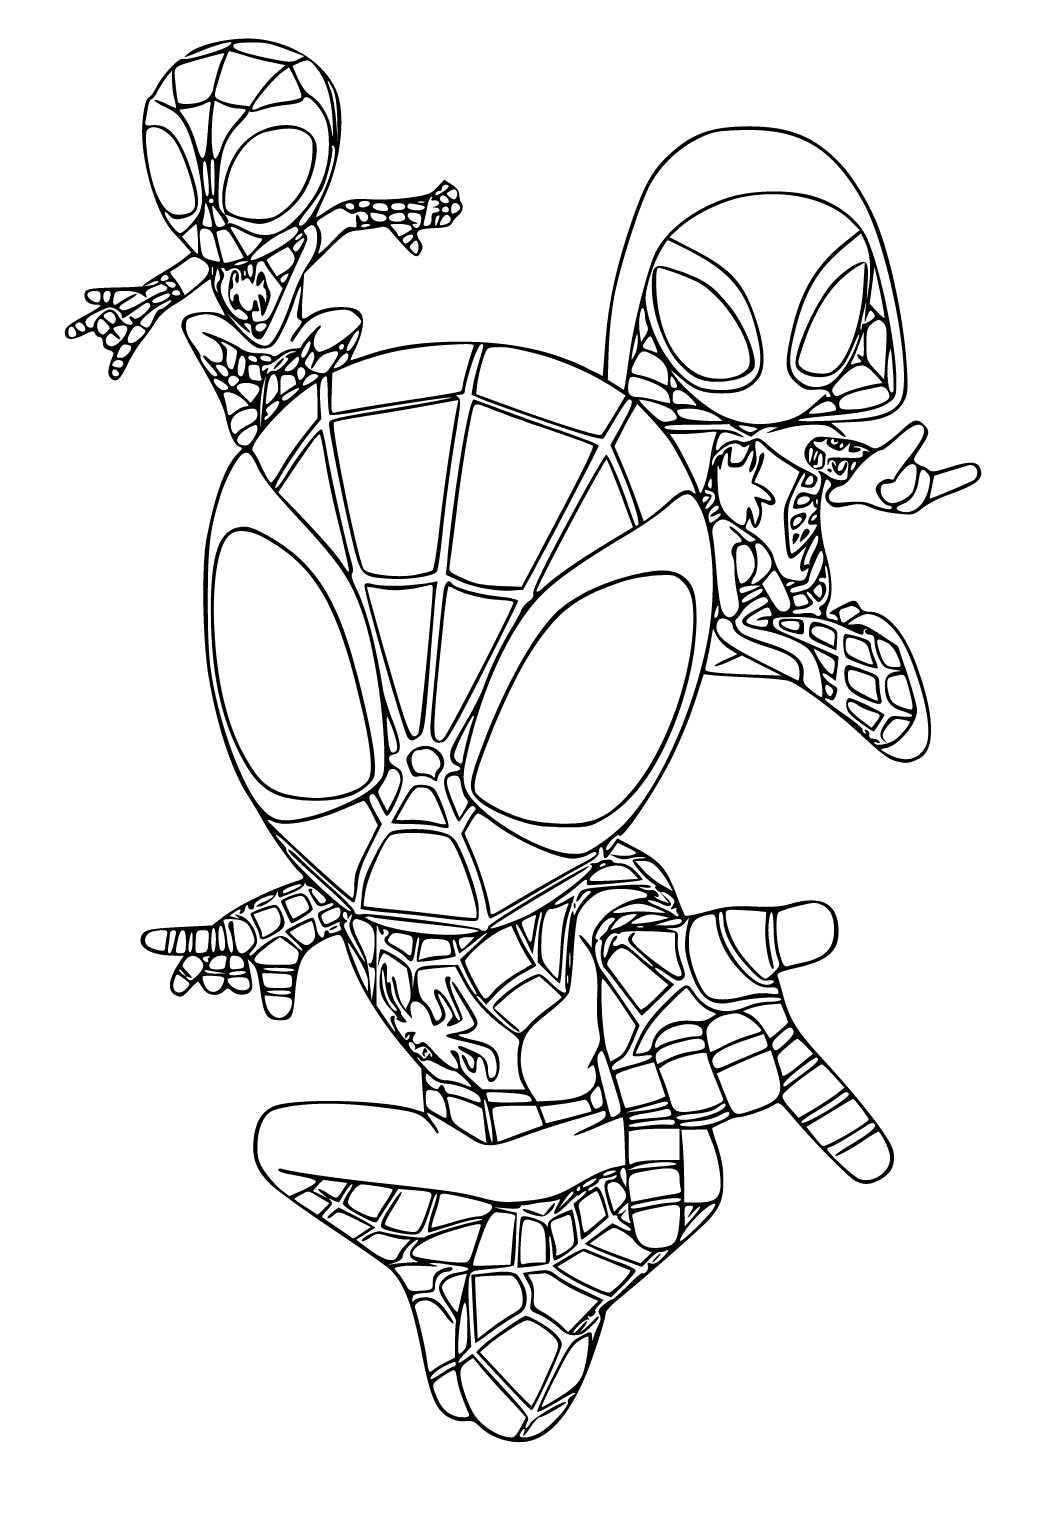 Free printable spidey and his amazing friends characters coloring page for adults and kids